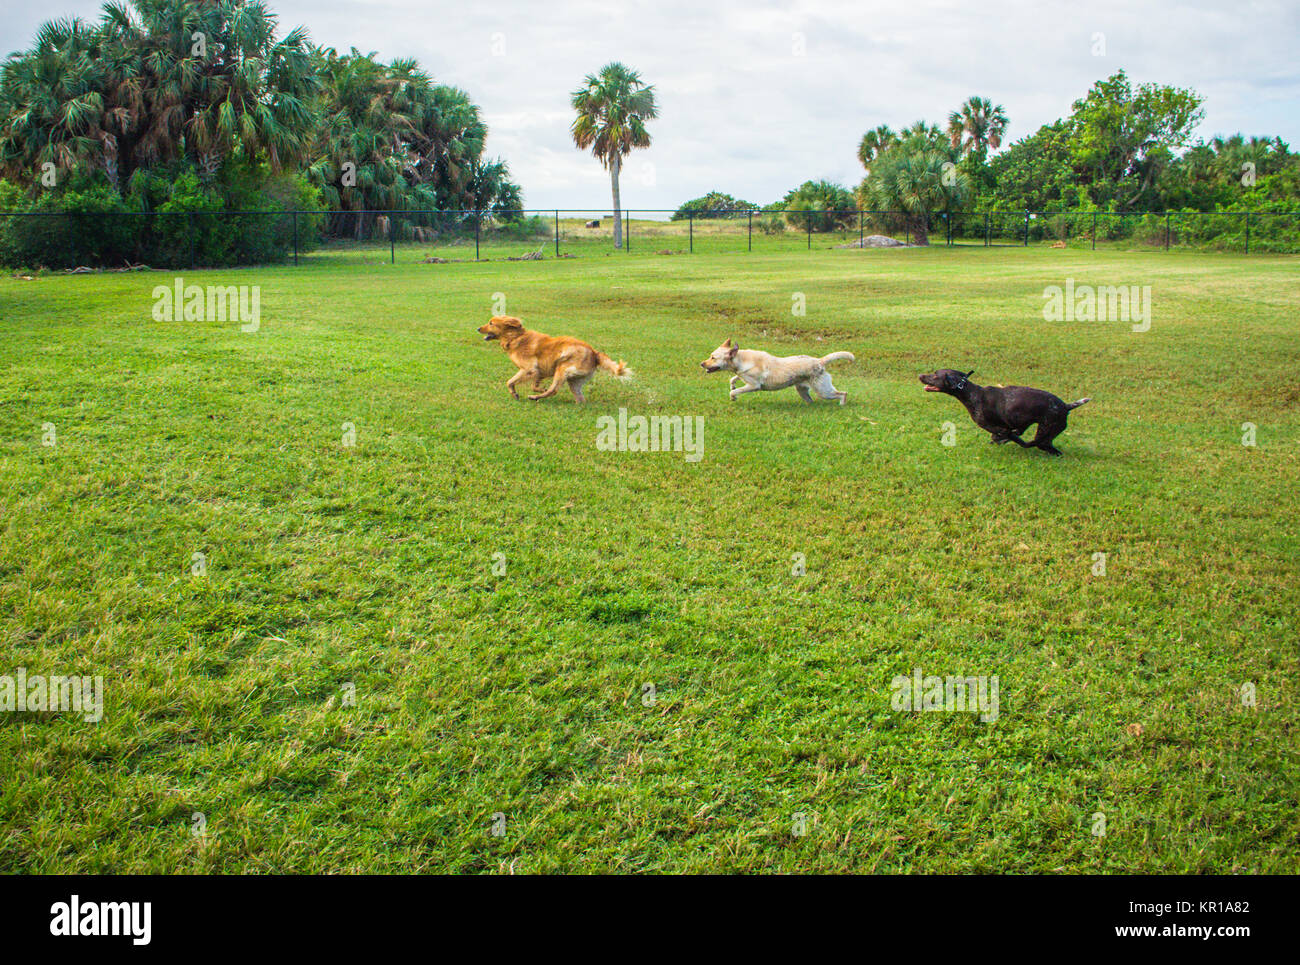 Three dogs running in a park, Fort de Soto, Florida, United States Stock Photo